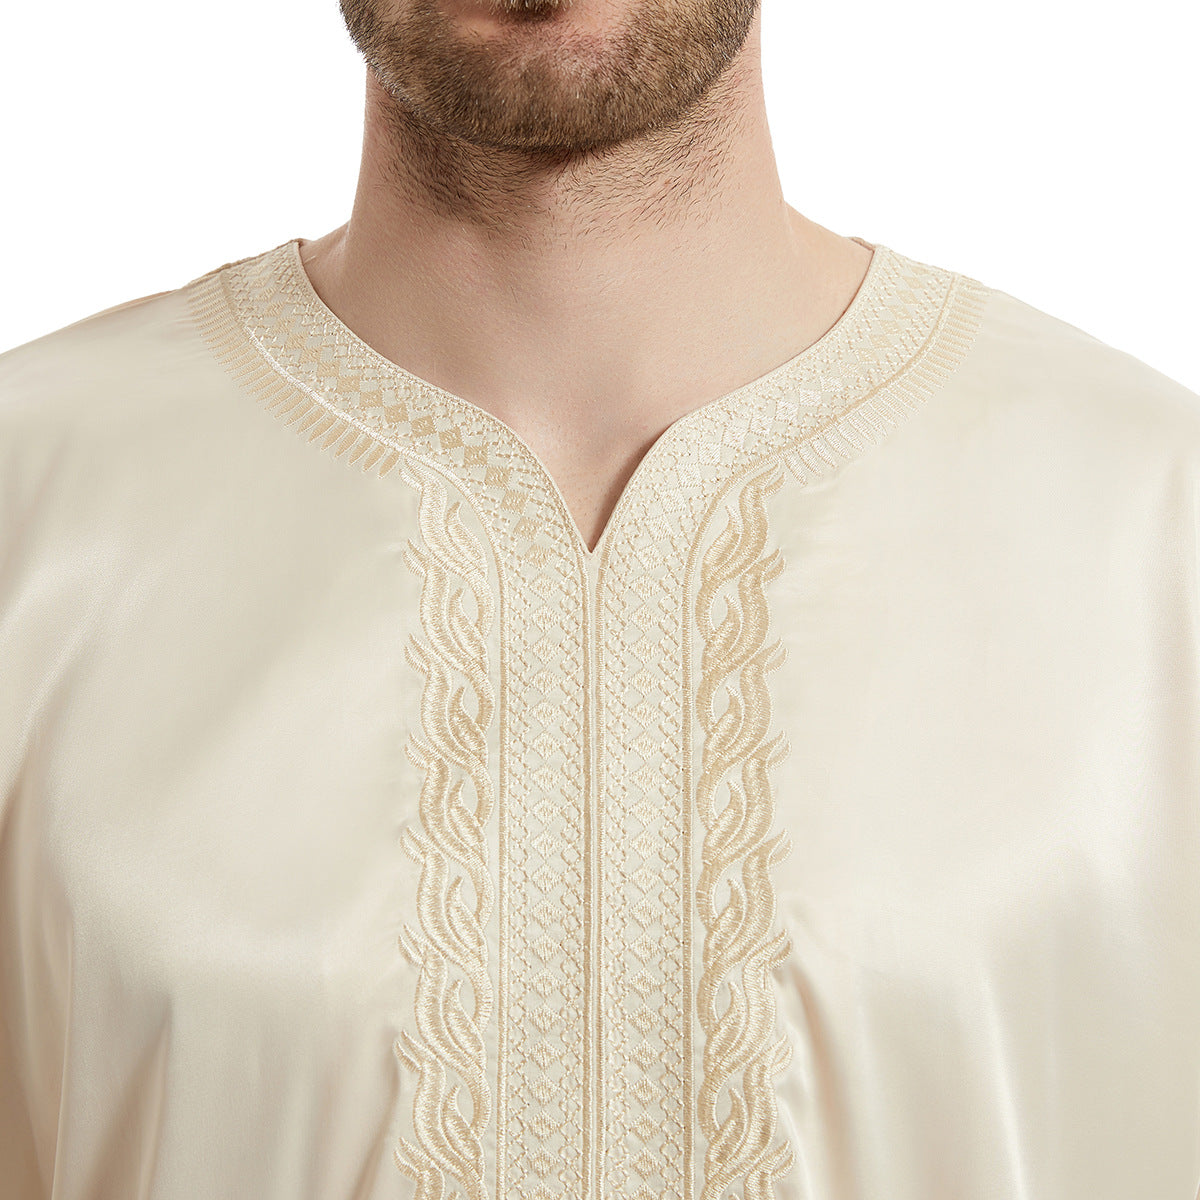 Discover elegance and modesty with Hikmah Boutique's Men's Abaya Half Sleeves in Beige. Premium materials and featuring exquisite embroidery, this abaya offers both style and comfort at a reasonable price. Elevate your Modest Clothing wardrobe with our exclusive collection of Islamic clothing for men. Shop now!